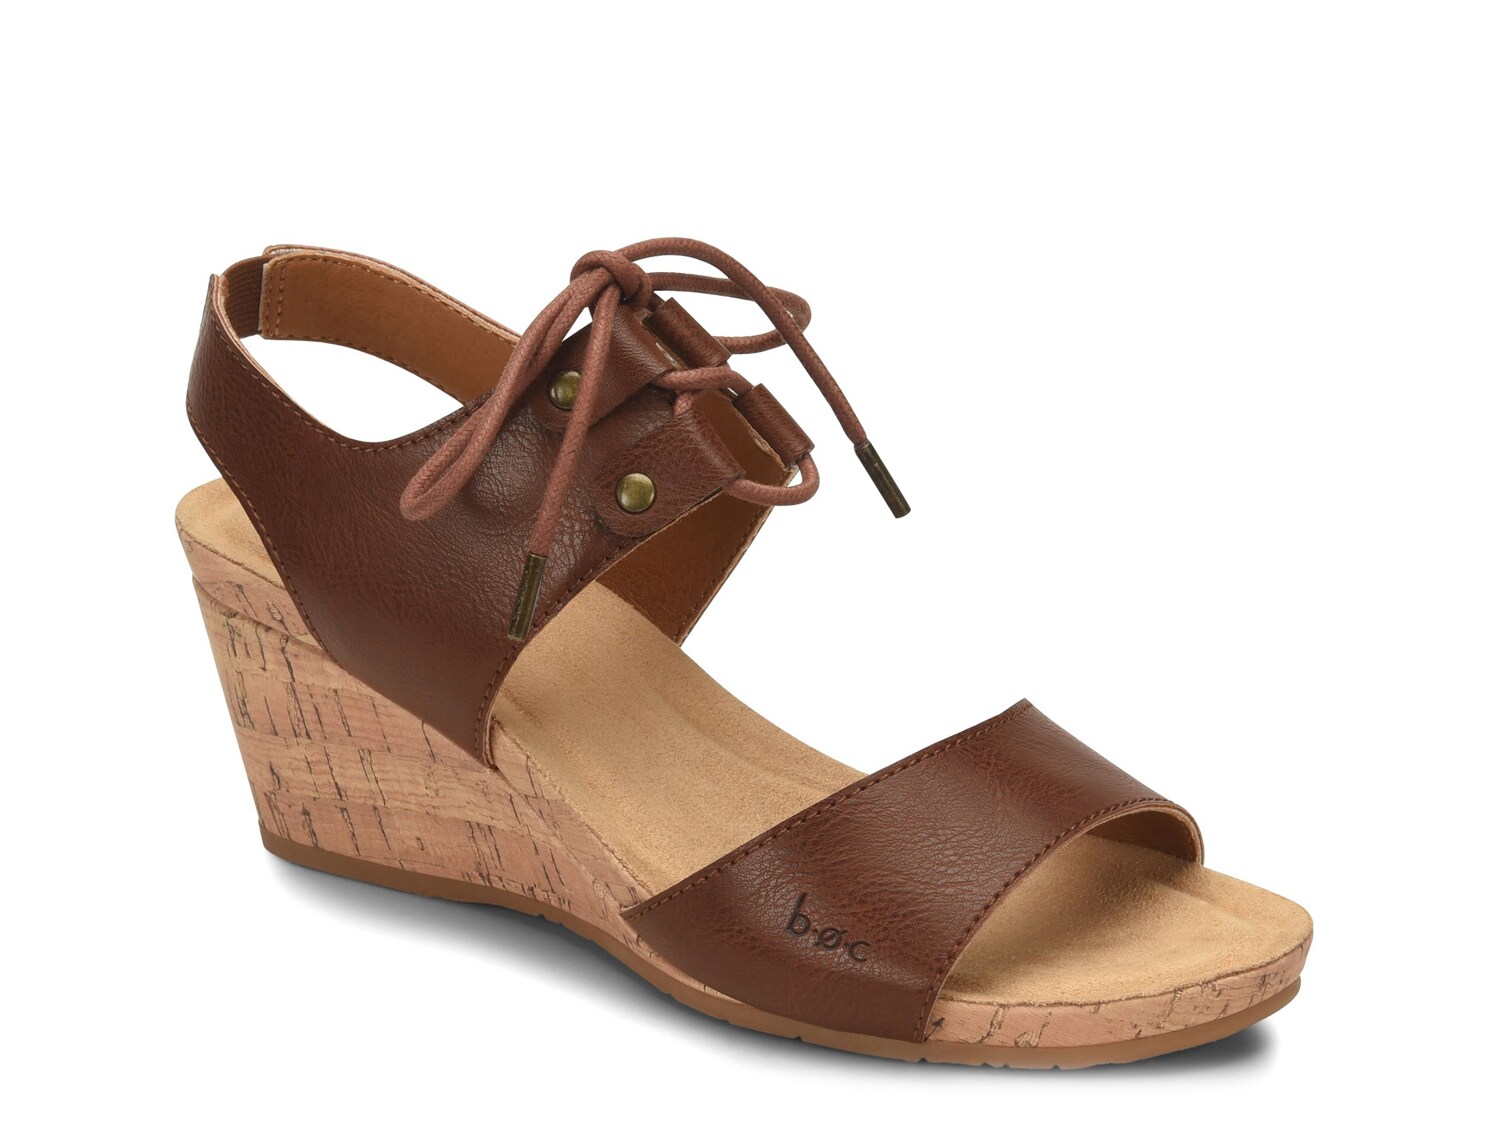 b.o.c Lily Wedge Sandal Women's Shoes | DSW